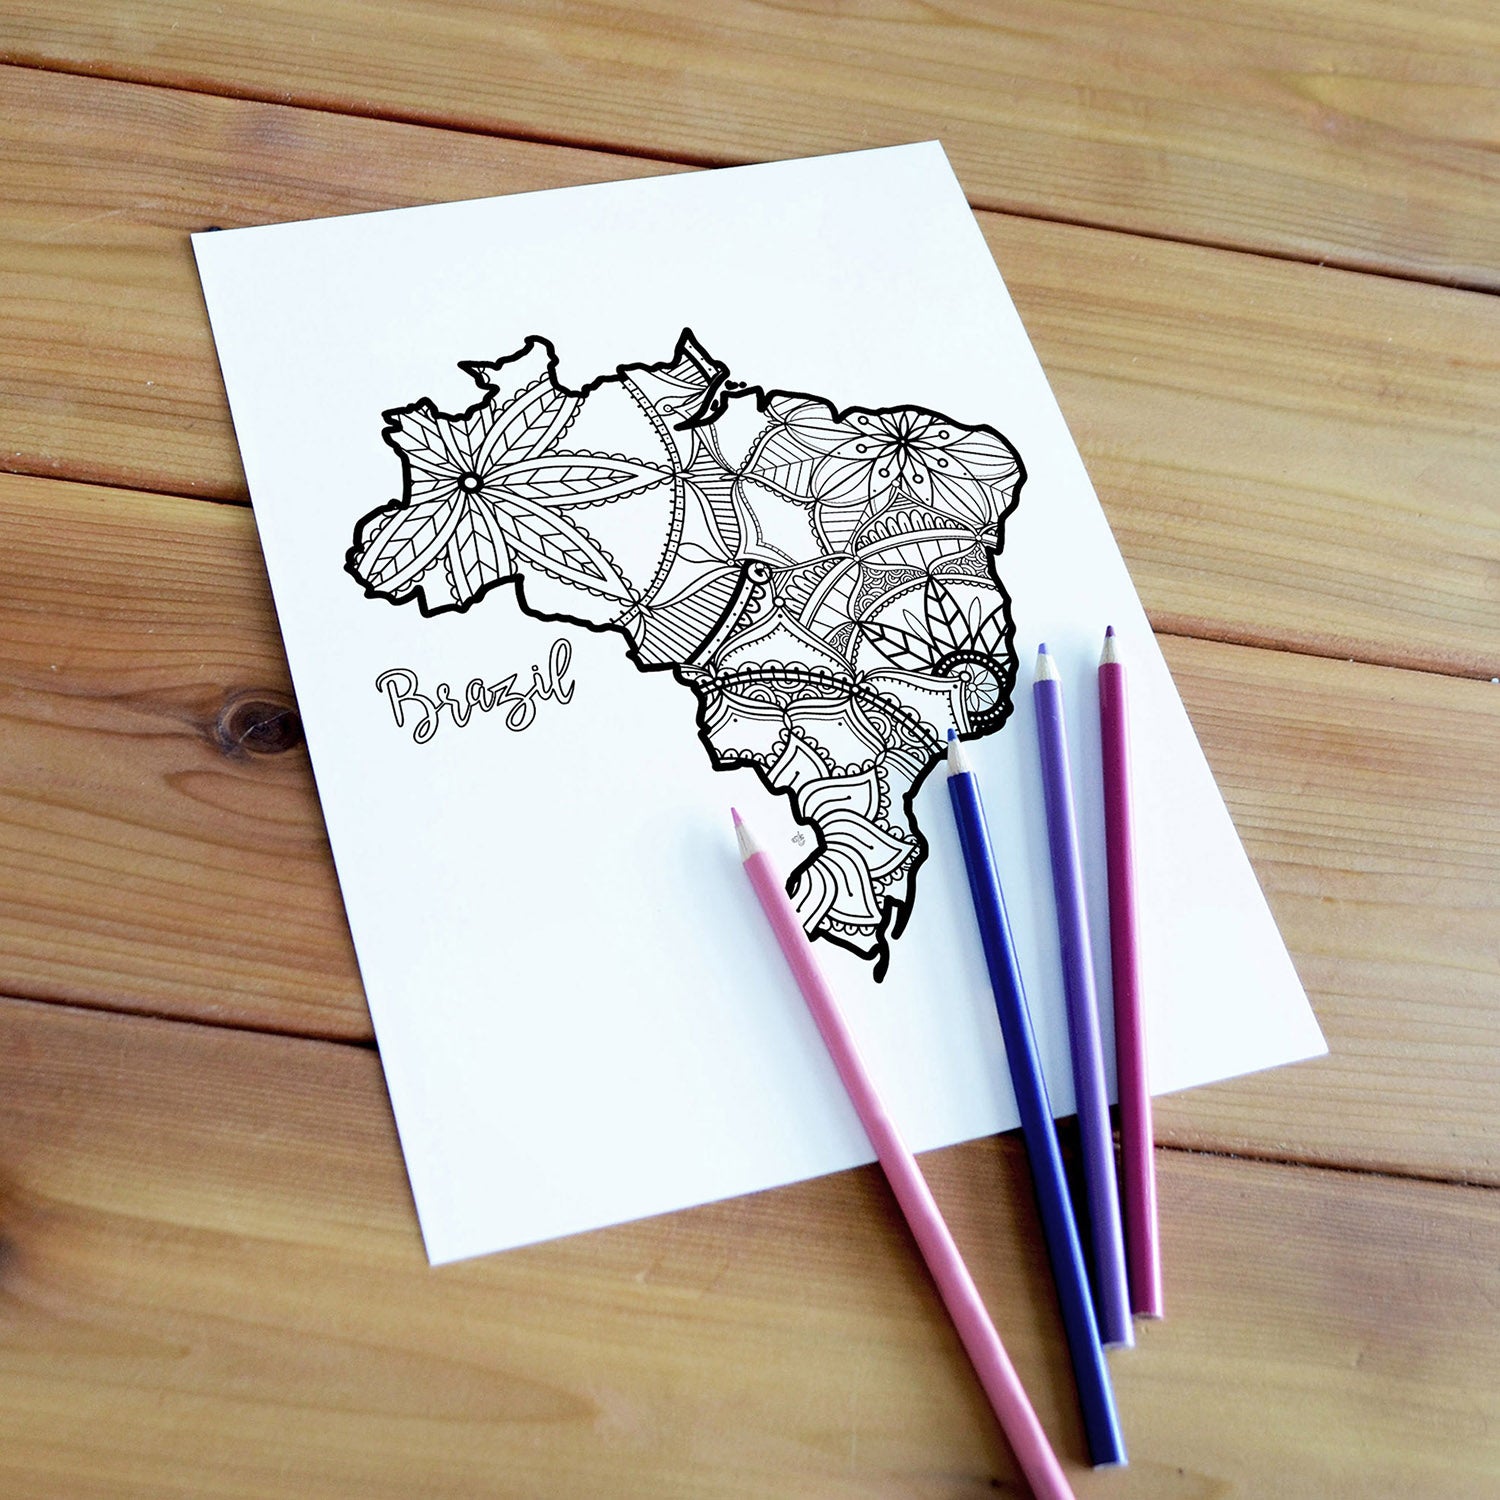 world map coloring page with labels